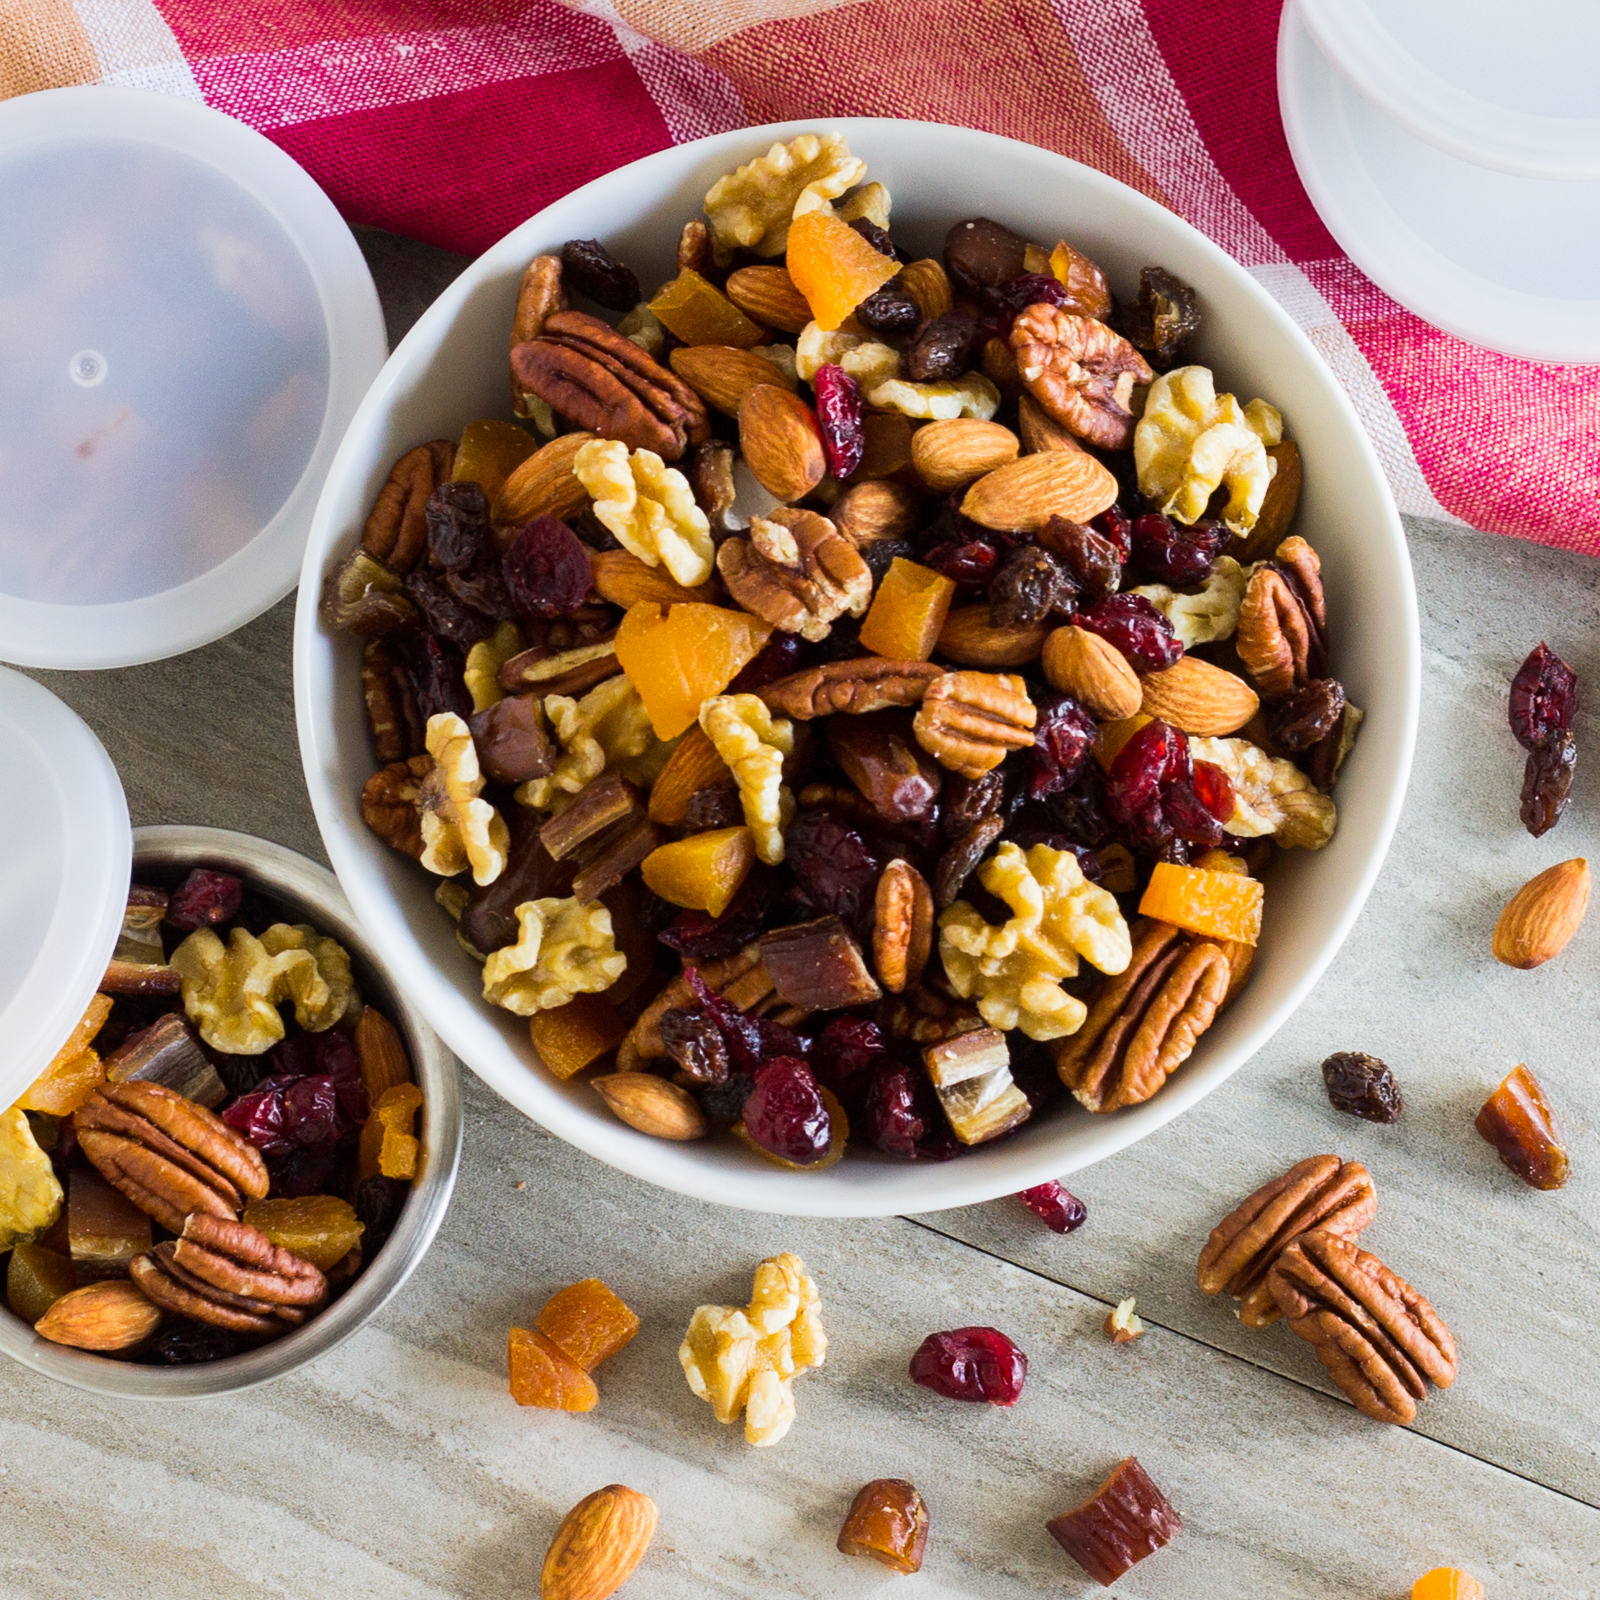 Trail Mix with Fruit and Nuts » The Joy of an Empty Pot